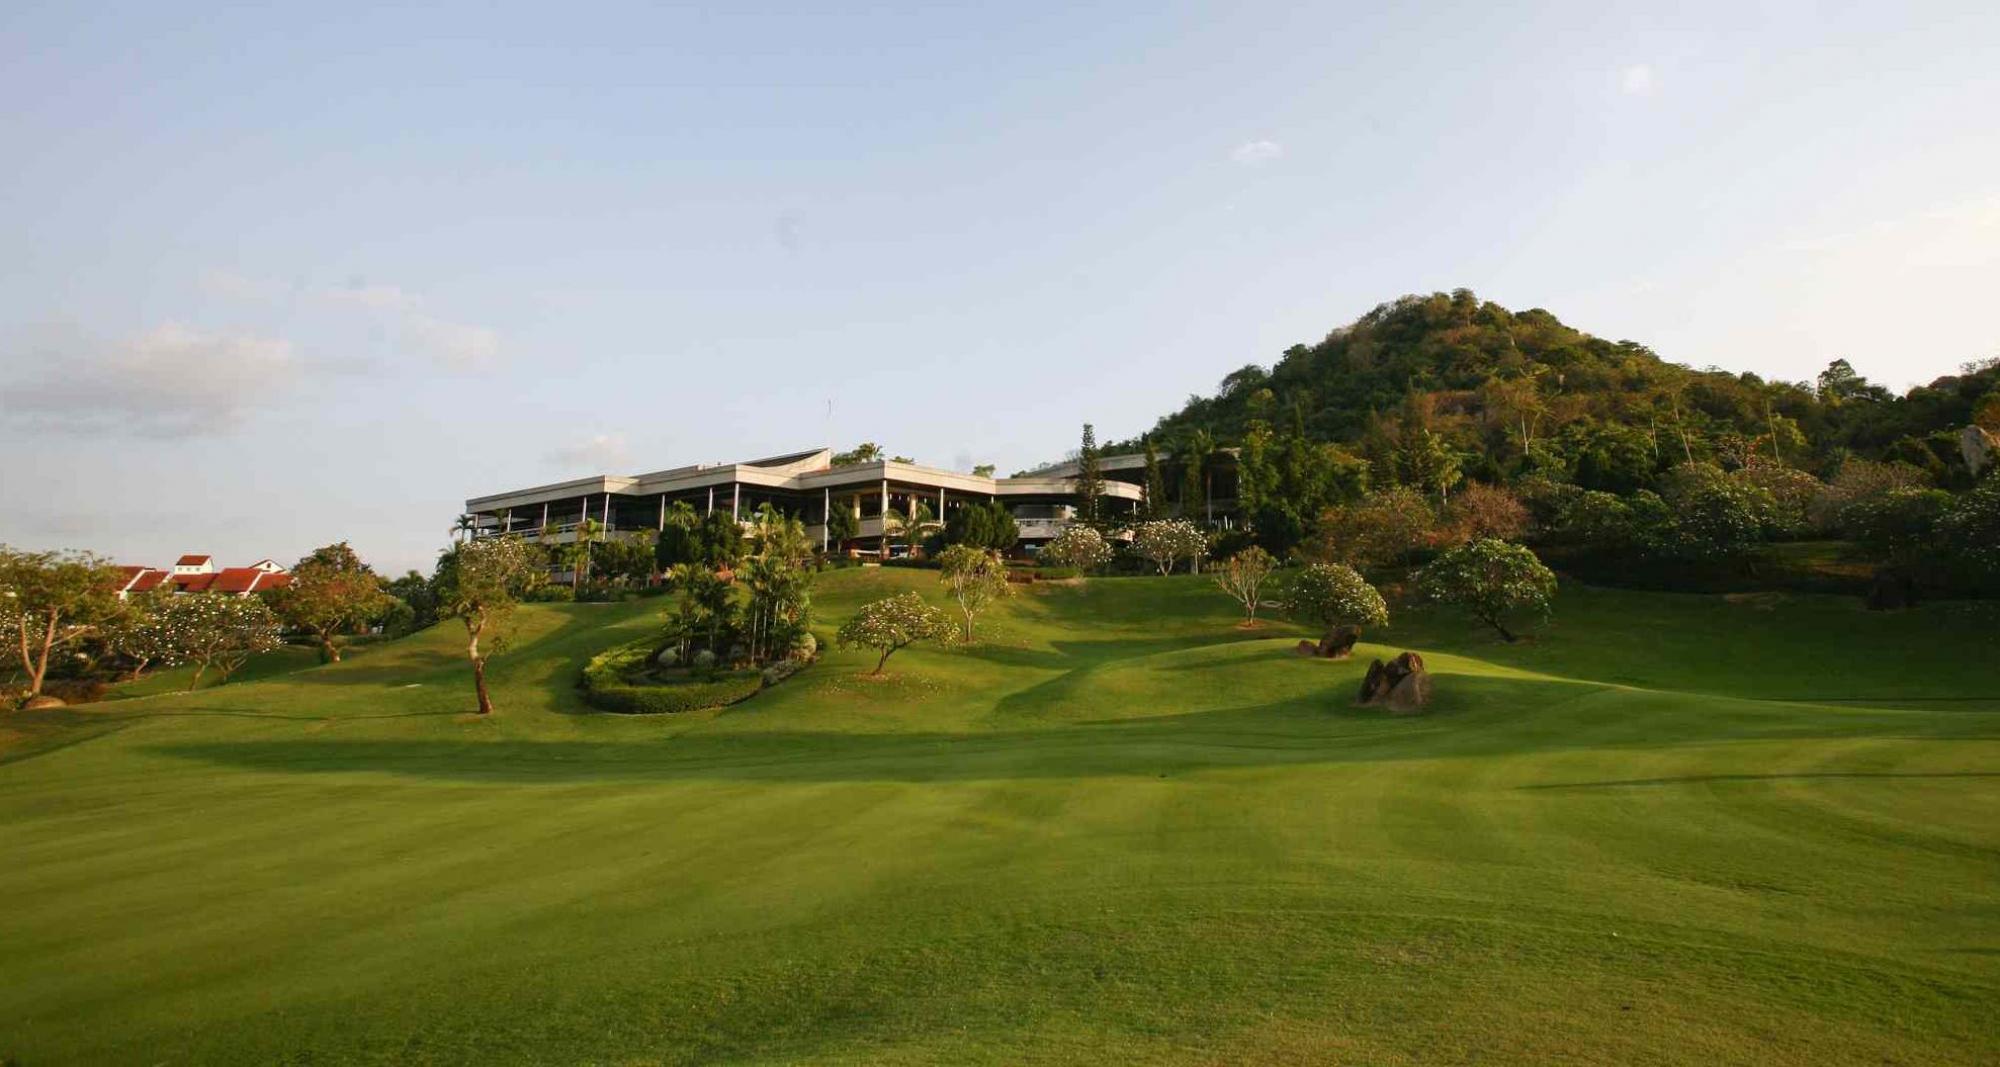 The Laem Chabang International Country Club's picturesque golf course within astounding Pattaya.